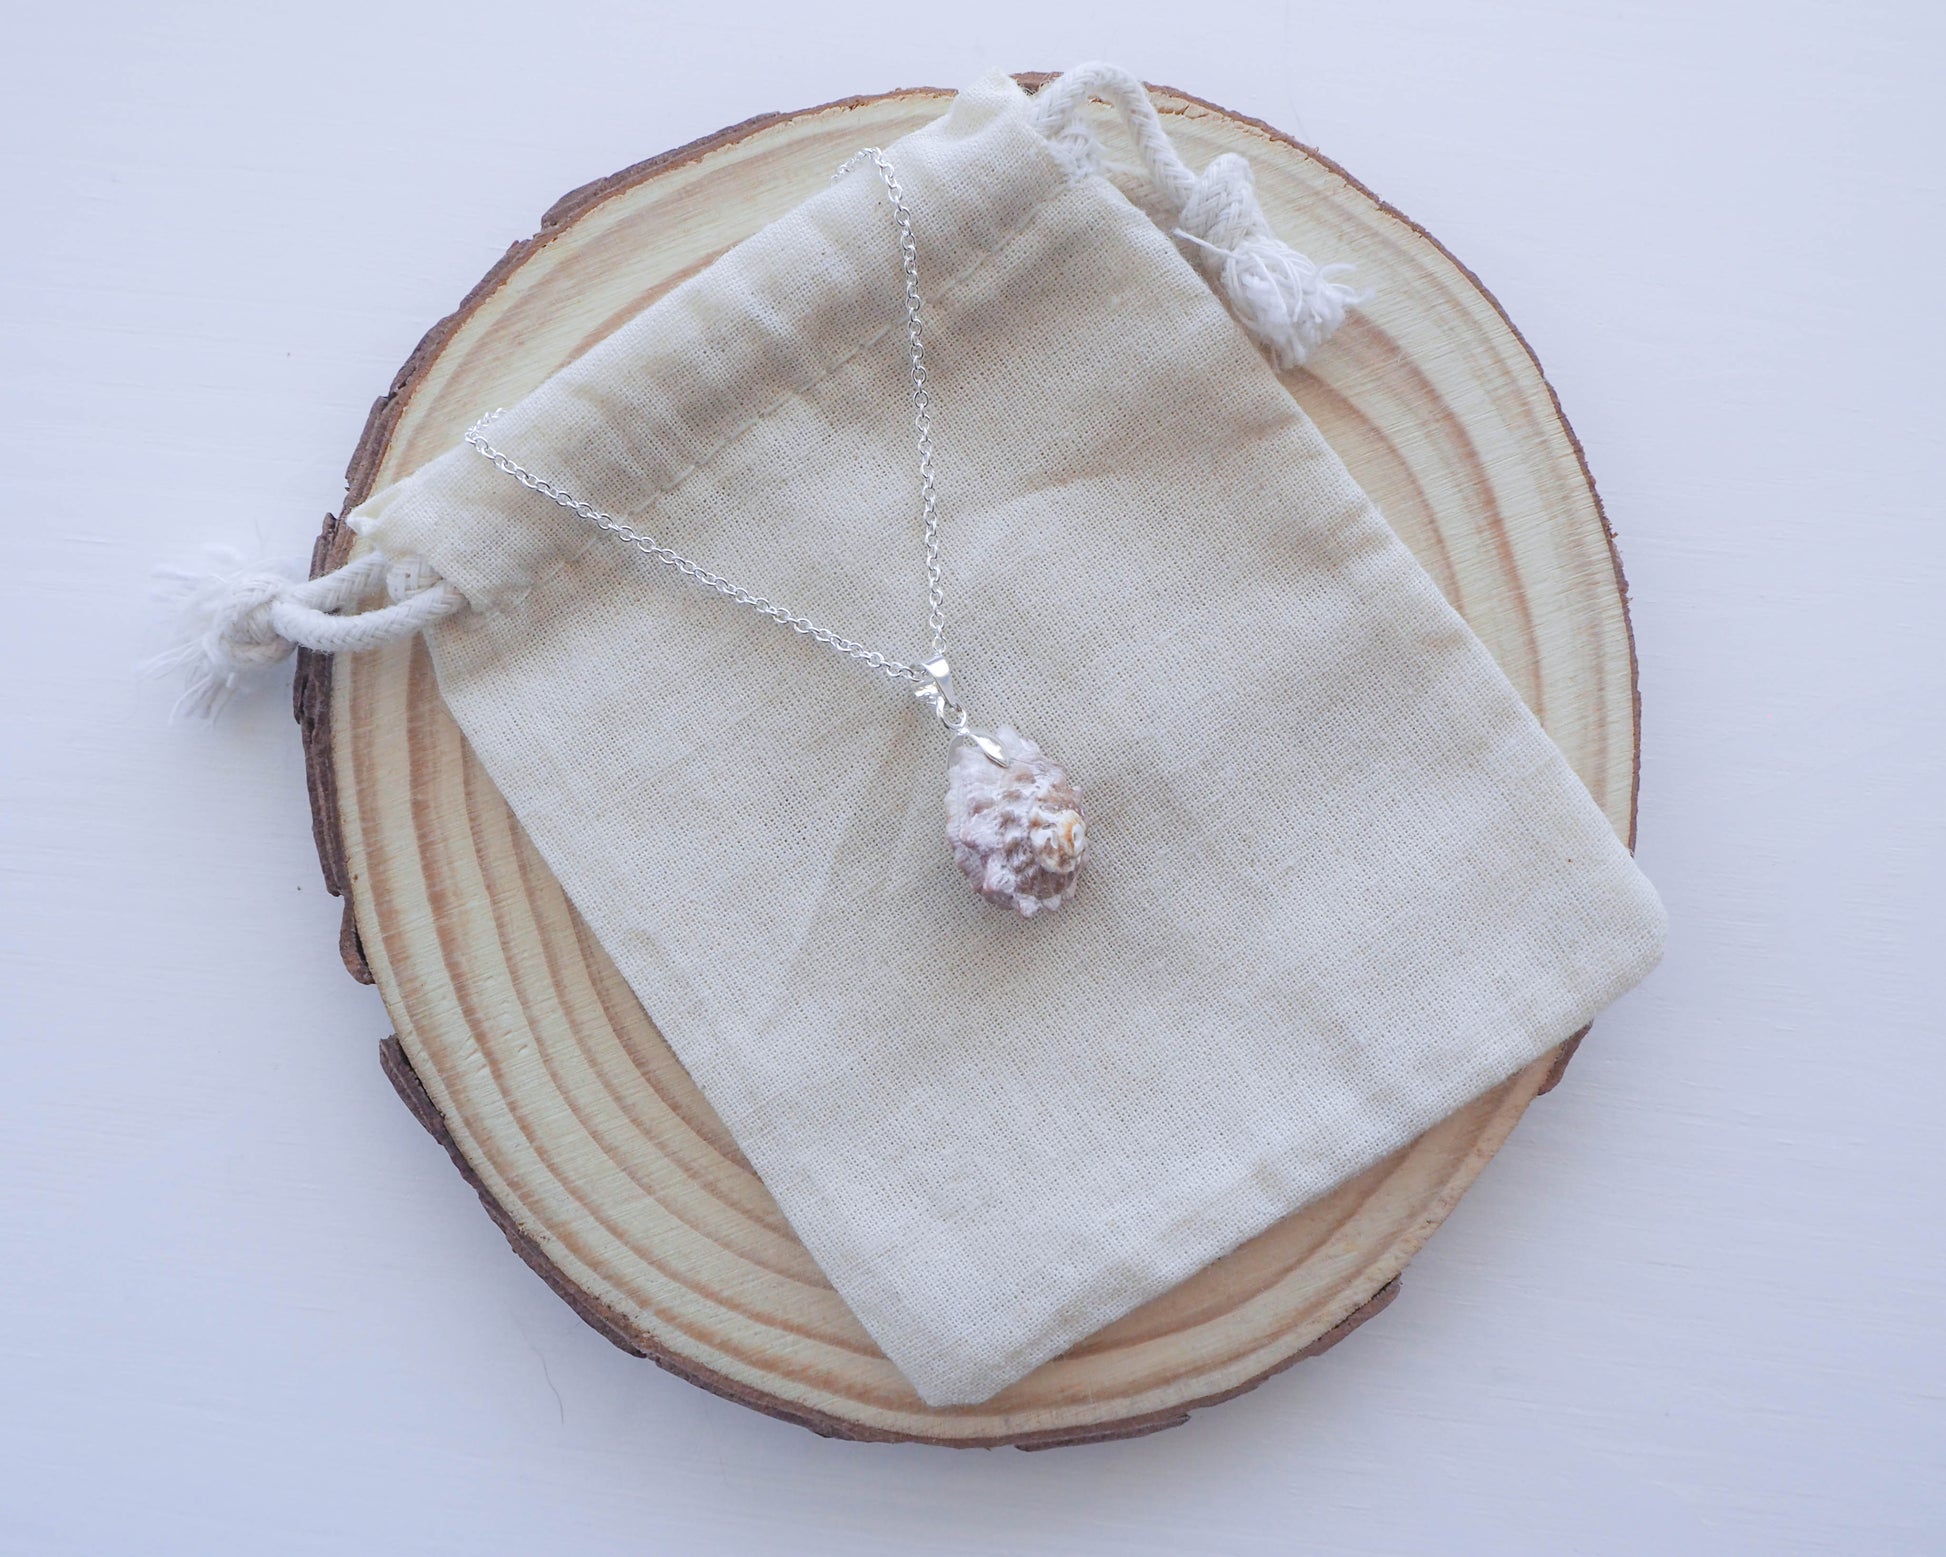 Unique Rough Star Shell Necklace Charm - Nature-Inspired Artistry